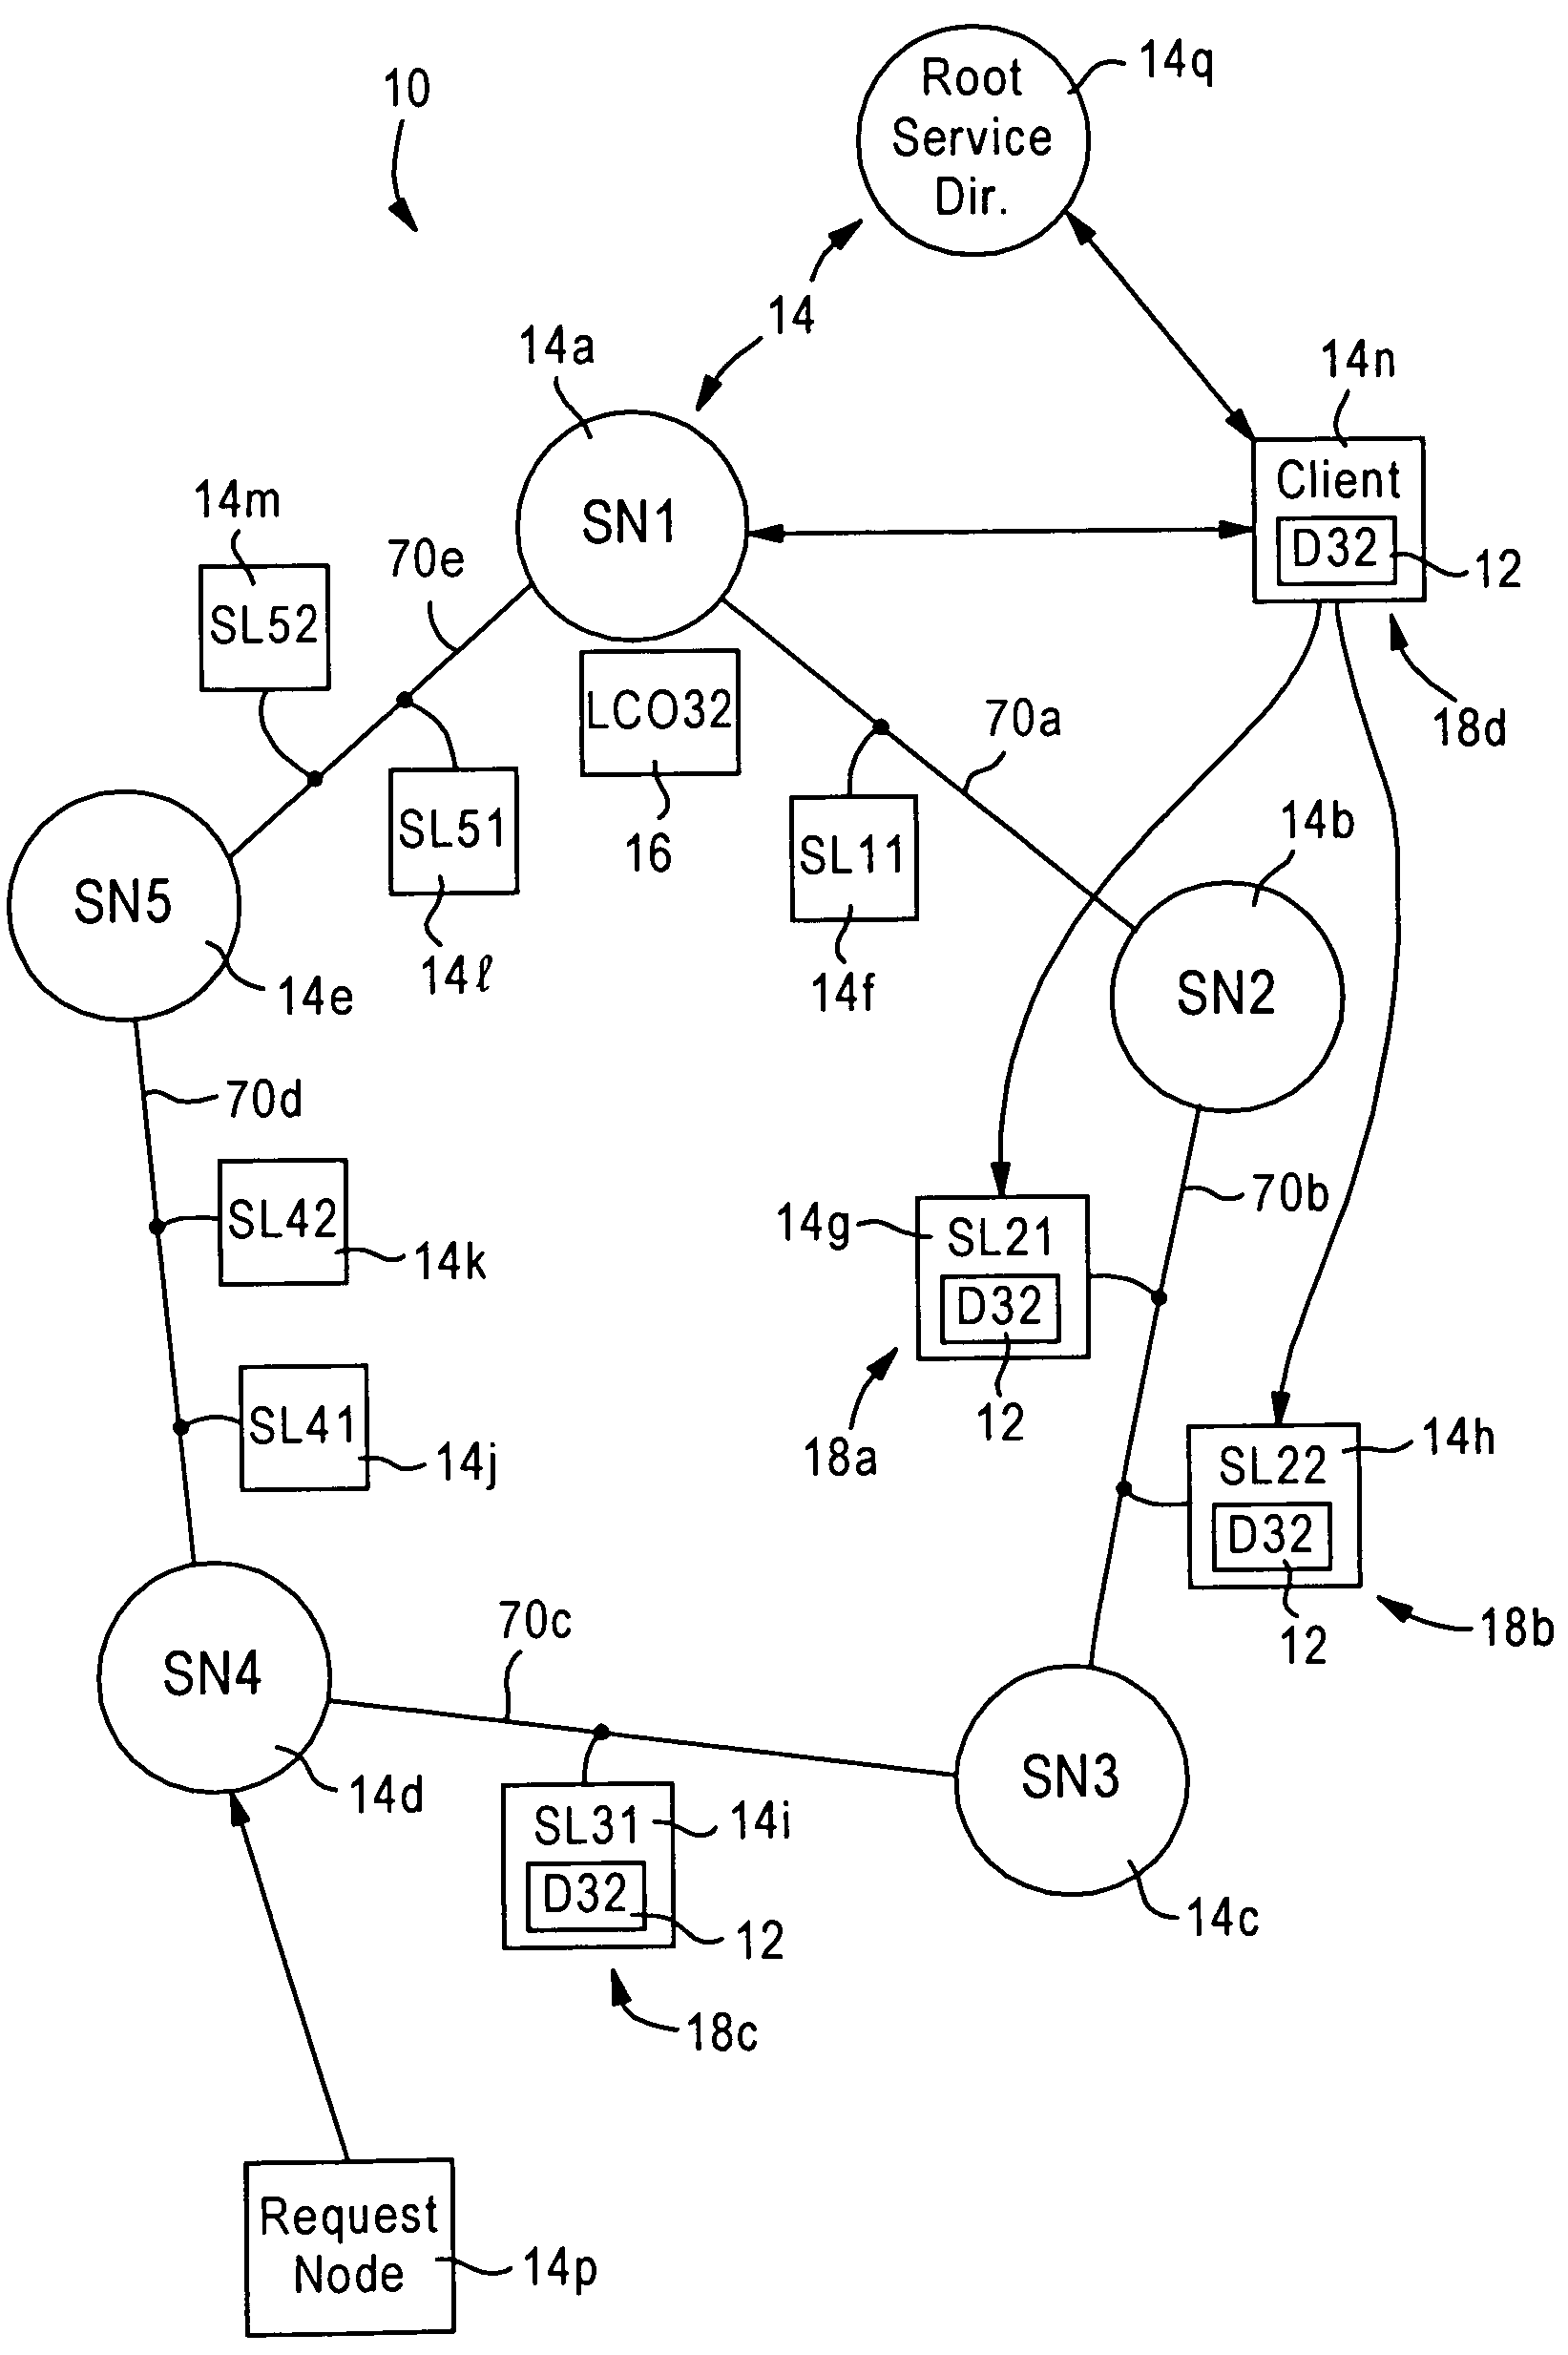 Arrangement in a network for passing control of distributed data between network nodes for optimized client access based on locality